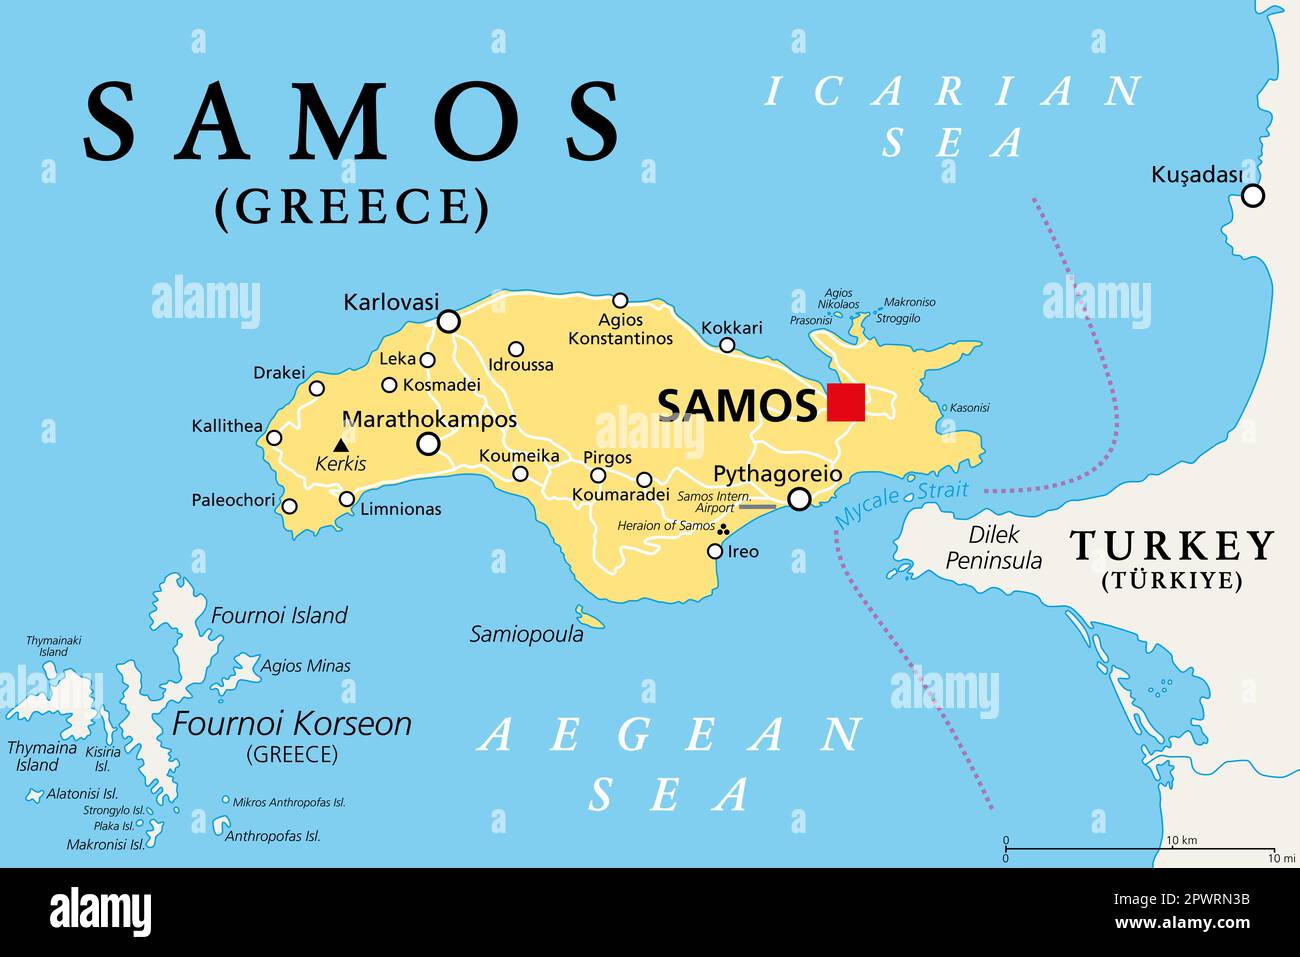 Samos, Greek island, political map. Island in the eastern Aegean Sea, and separated of the western Turkey coast by the Mycale Strait. Stock Photo